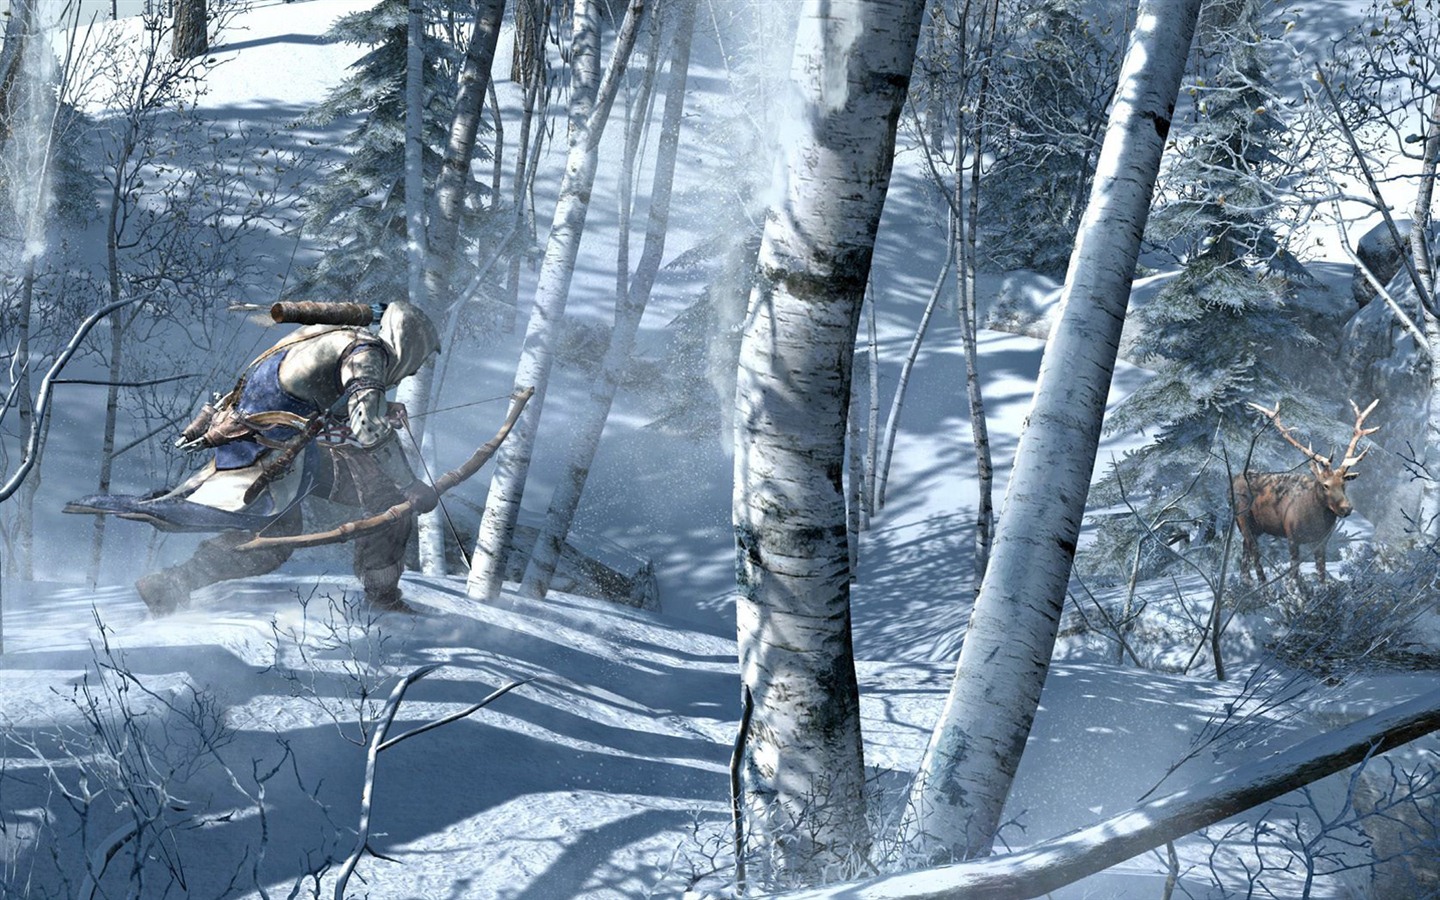 Assassin's Creed 3 HD wallpapers #10 - 1440x900